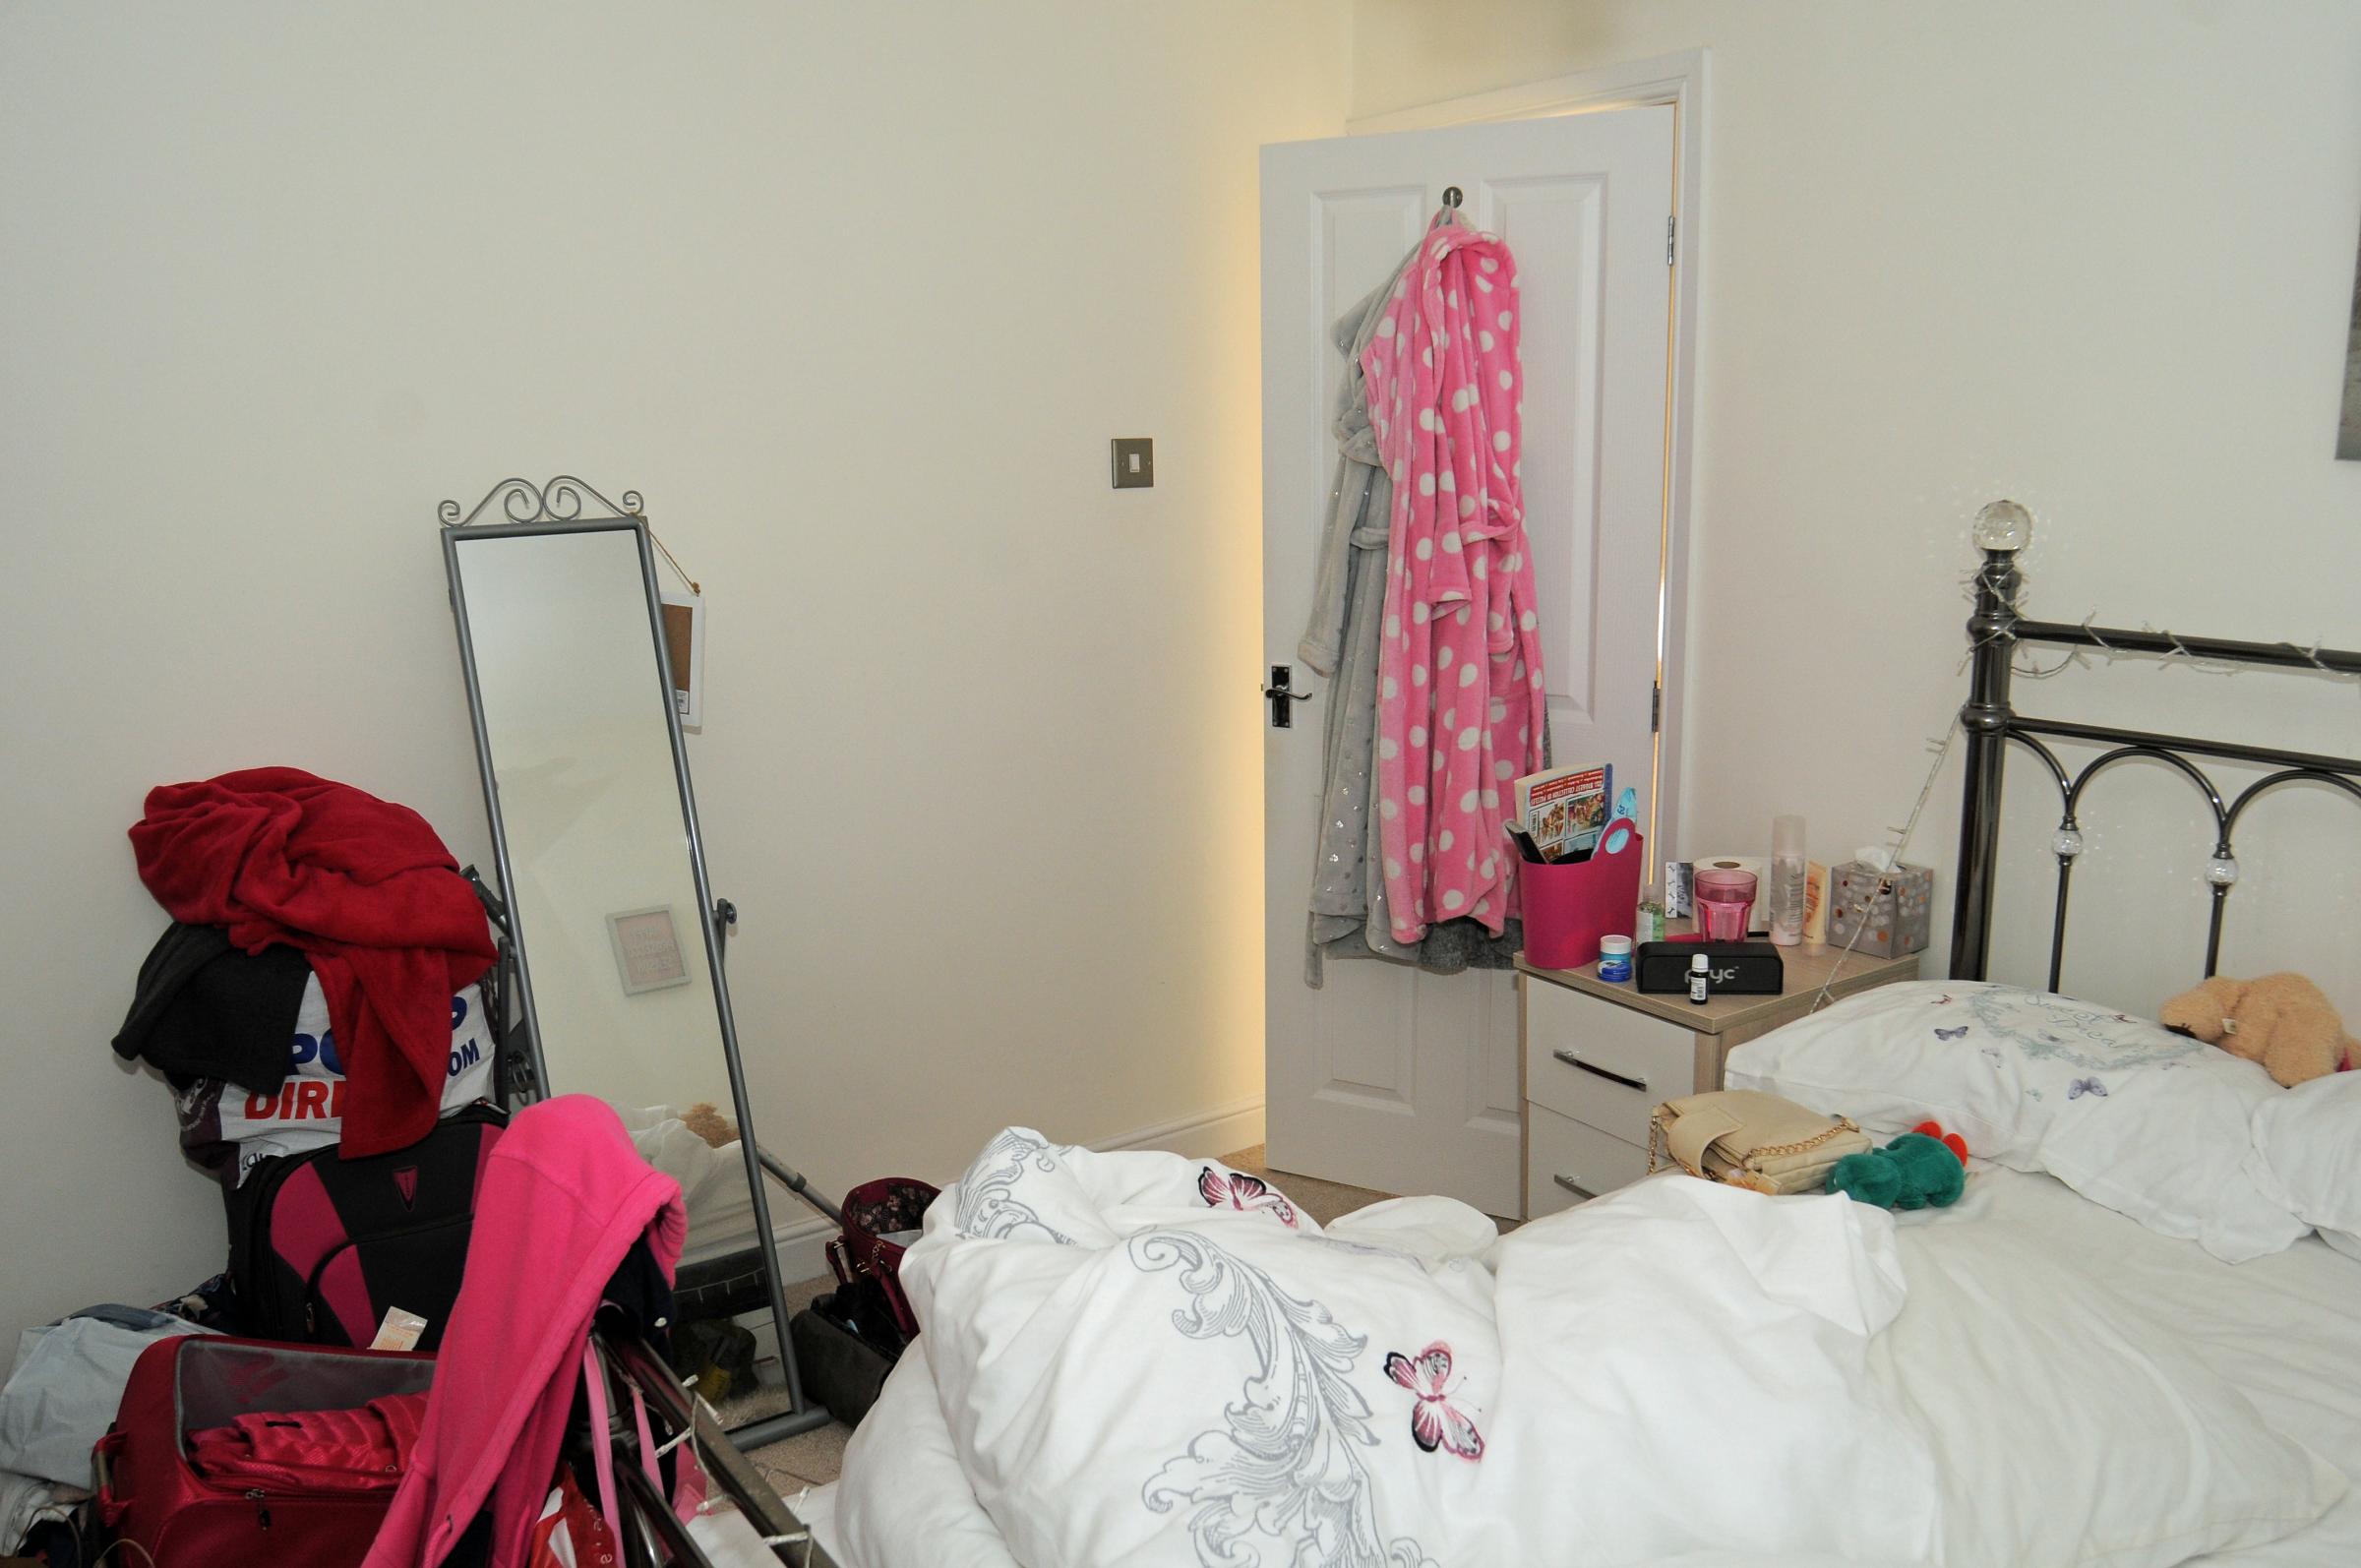 A photo of Lucy Letbys bedroom at Westbourne Road, Chester, shown in court. Picture: Cheshire Constabulary/CPS.